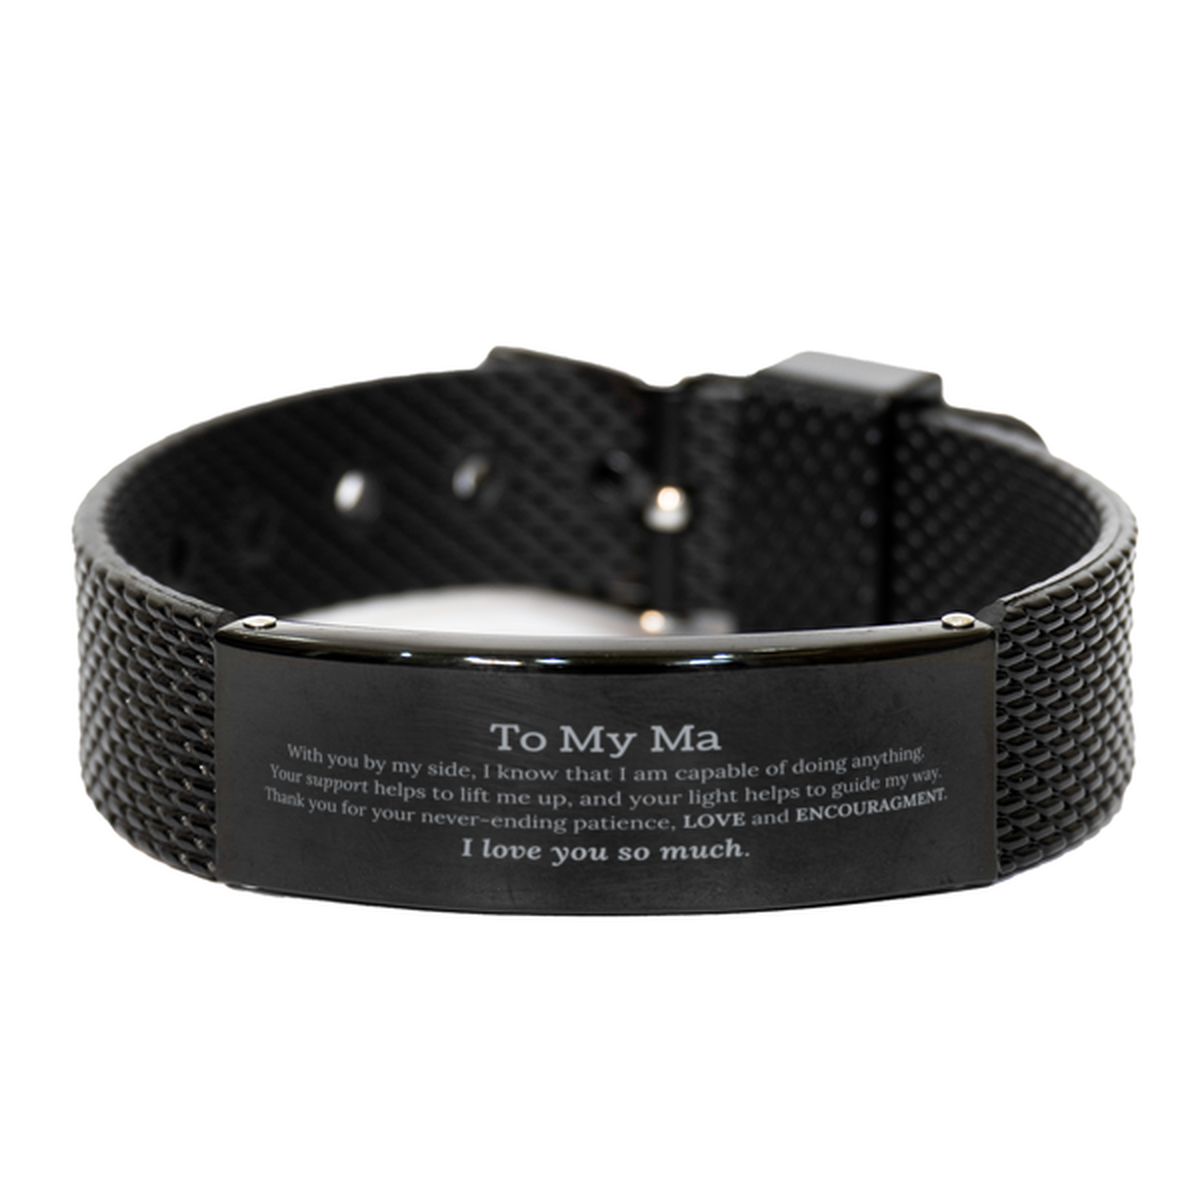 Appreciation Ma Black Shark Mesh Bracelet Gifts, To My Ma Birthday Christmas Wedding Keepsake Gifts for Ma With you by my side, I know that I am capable of doing anything. I love you so much